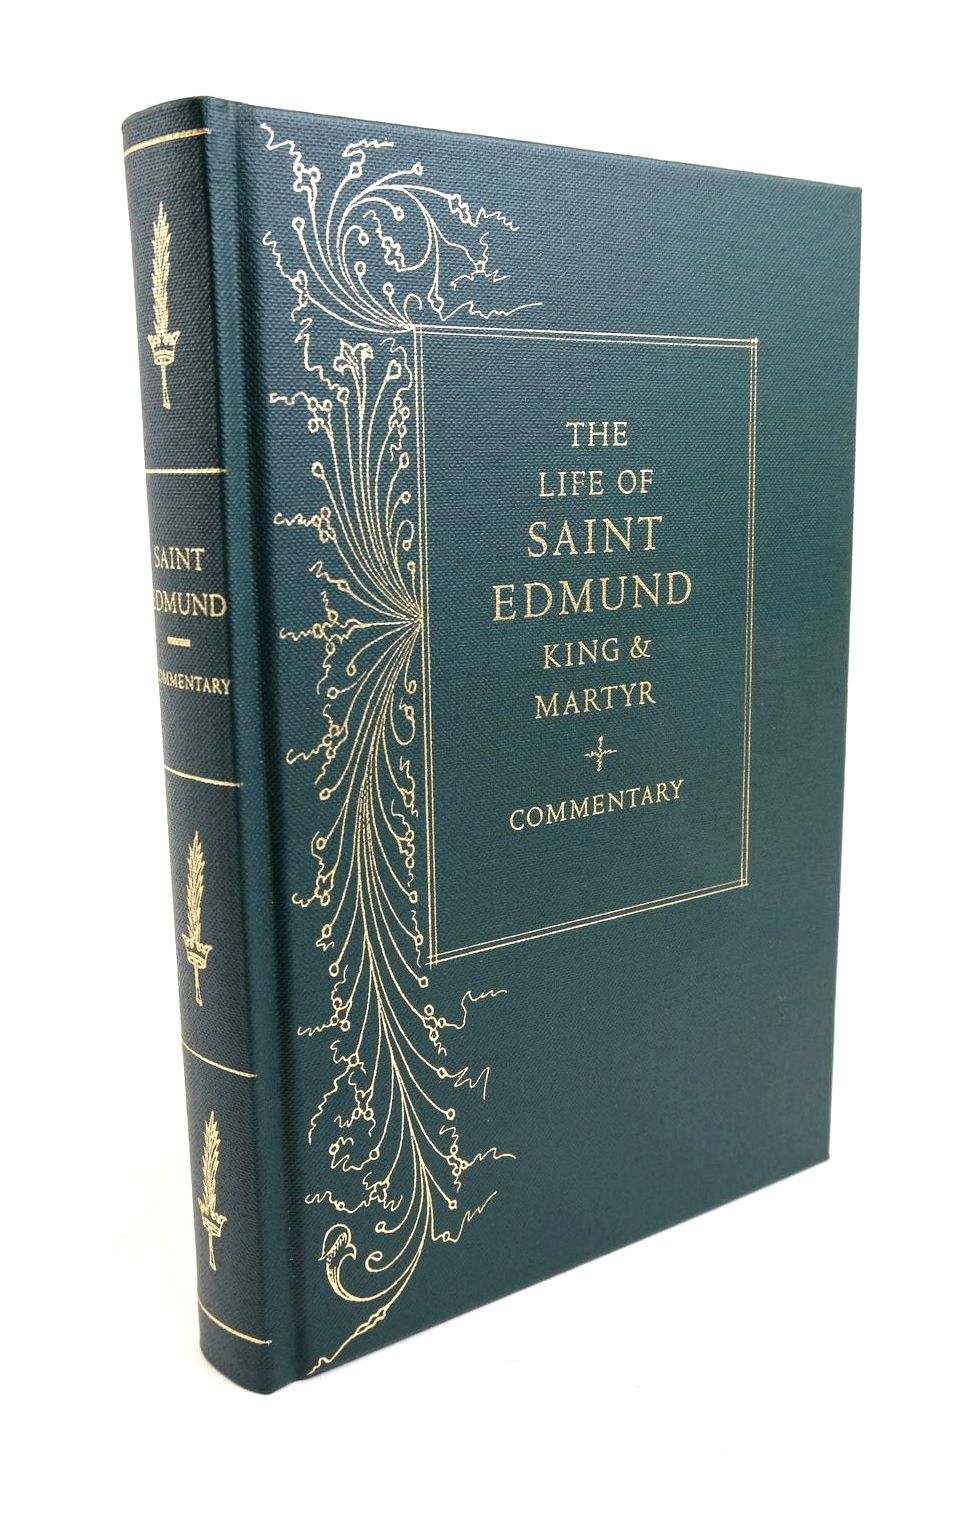 Photo of THE LIFE OF SAINT EDMUND KING & MARTYR written by Lydgate, John
Edwards, A.S.G. published by Folio Society (STOCK CODE: 1321648)  for sale by Stella & Rose's Books